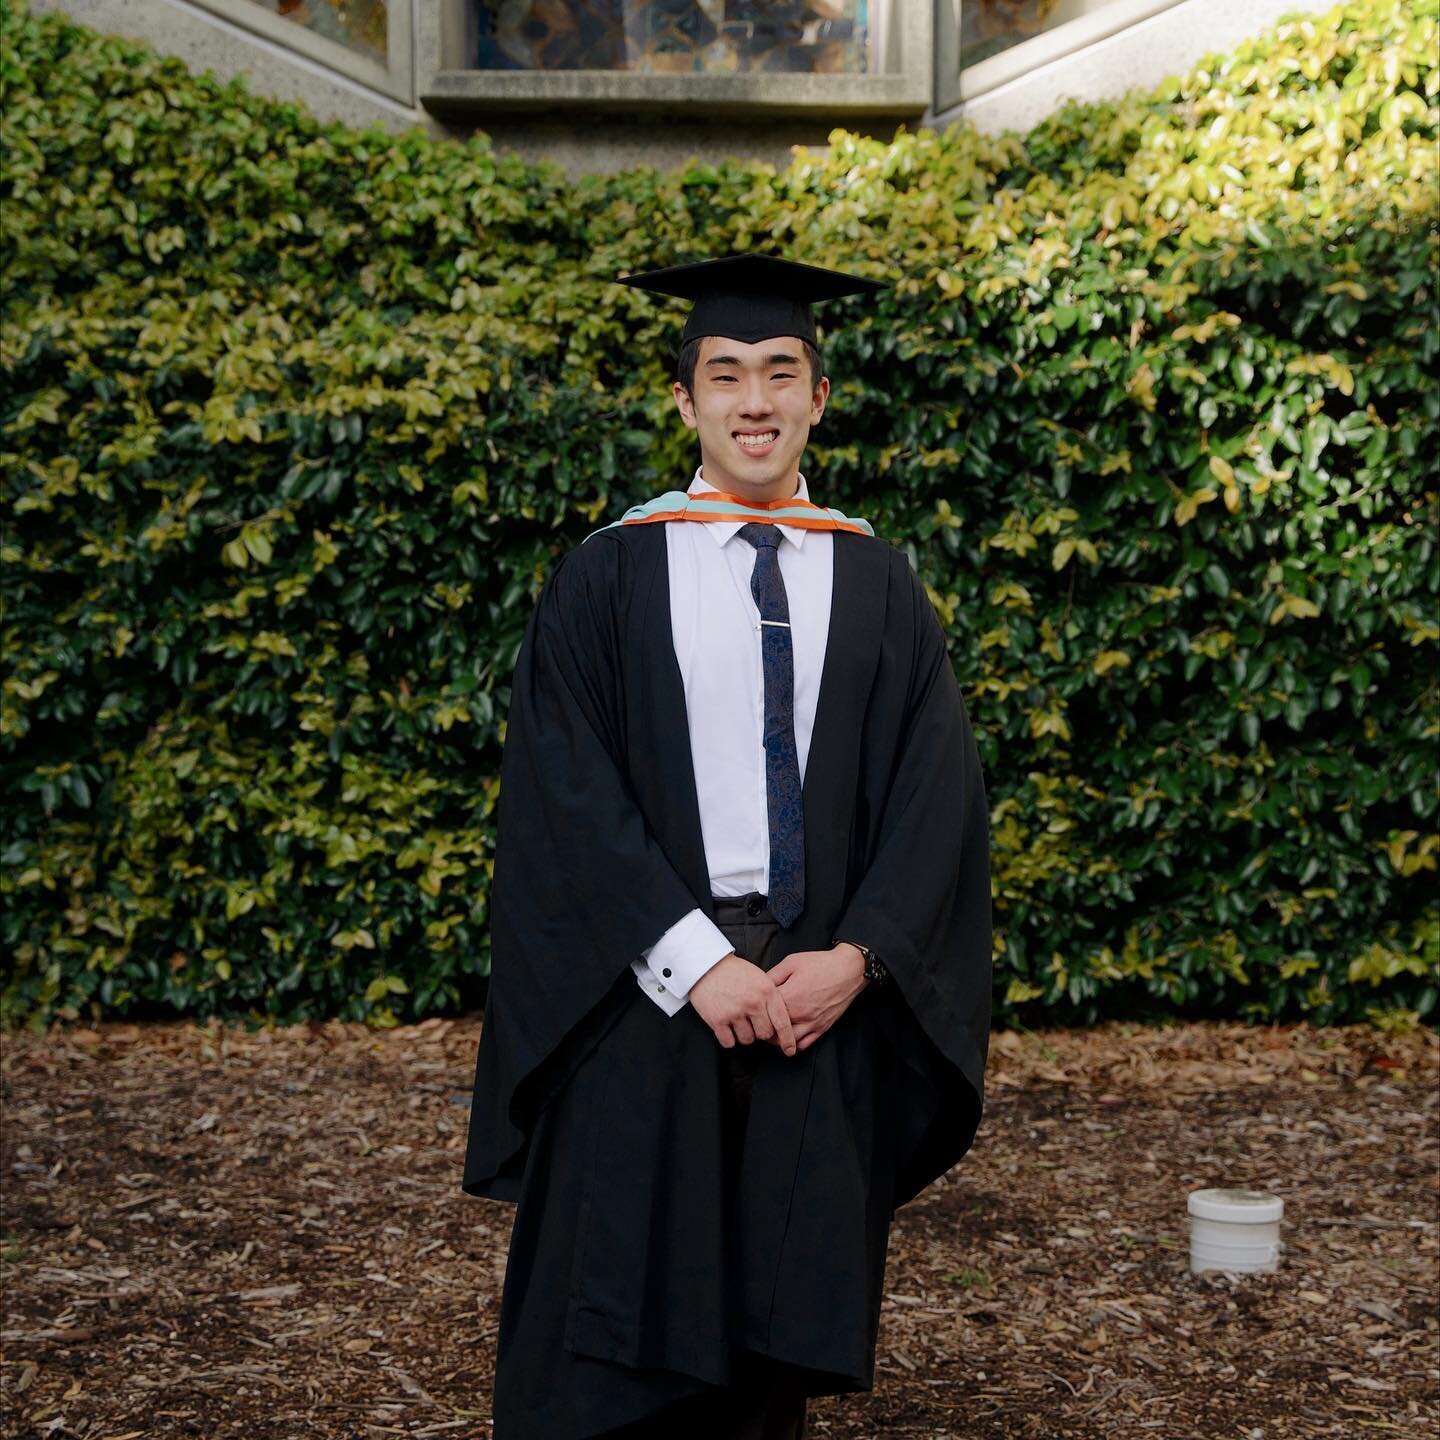 Last week I graduated from Monash with a bachelors of Industrial Design and IT (Interactive Media). Four years ago, I entered uni with skepticism and was really questioning if this was the right pathway for me. Over the next three years, this air of 